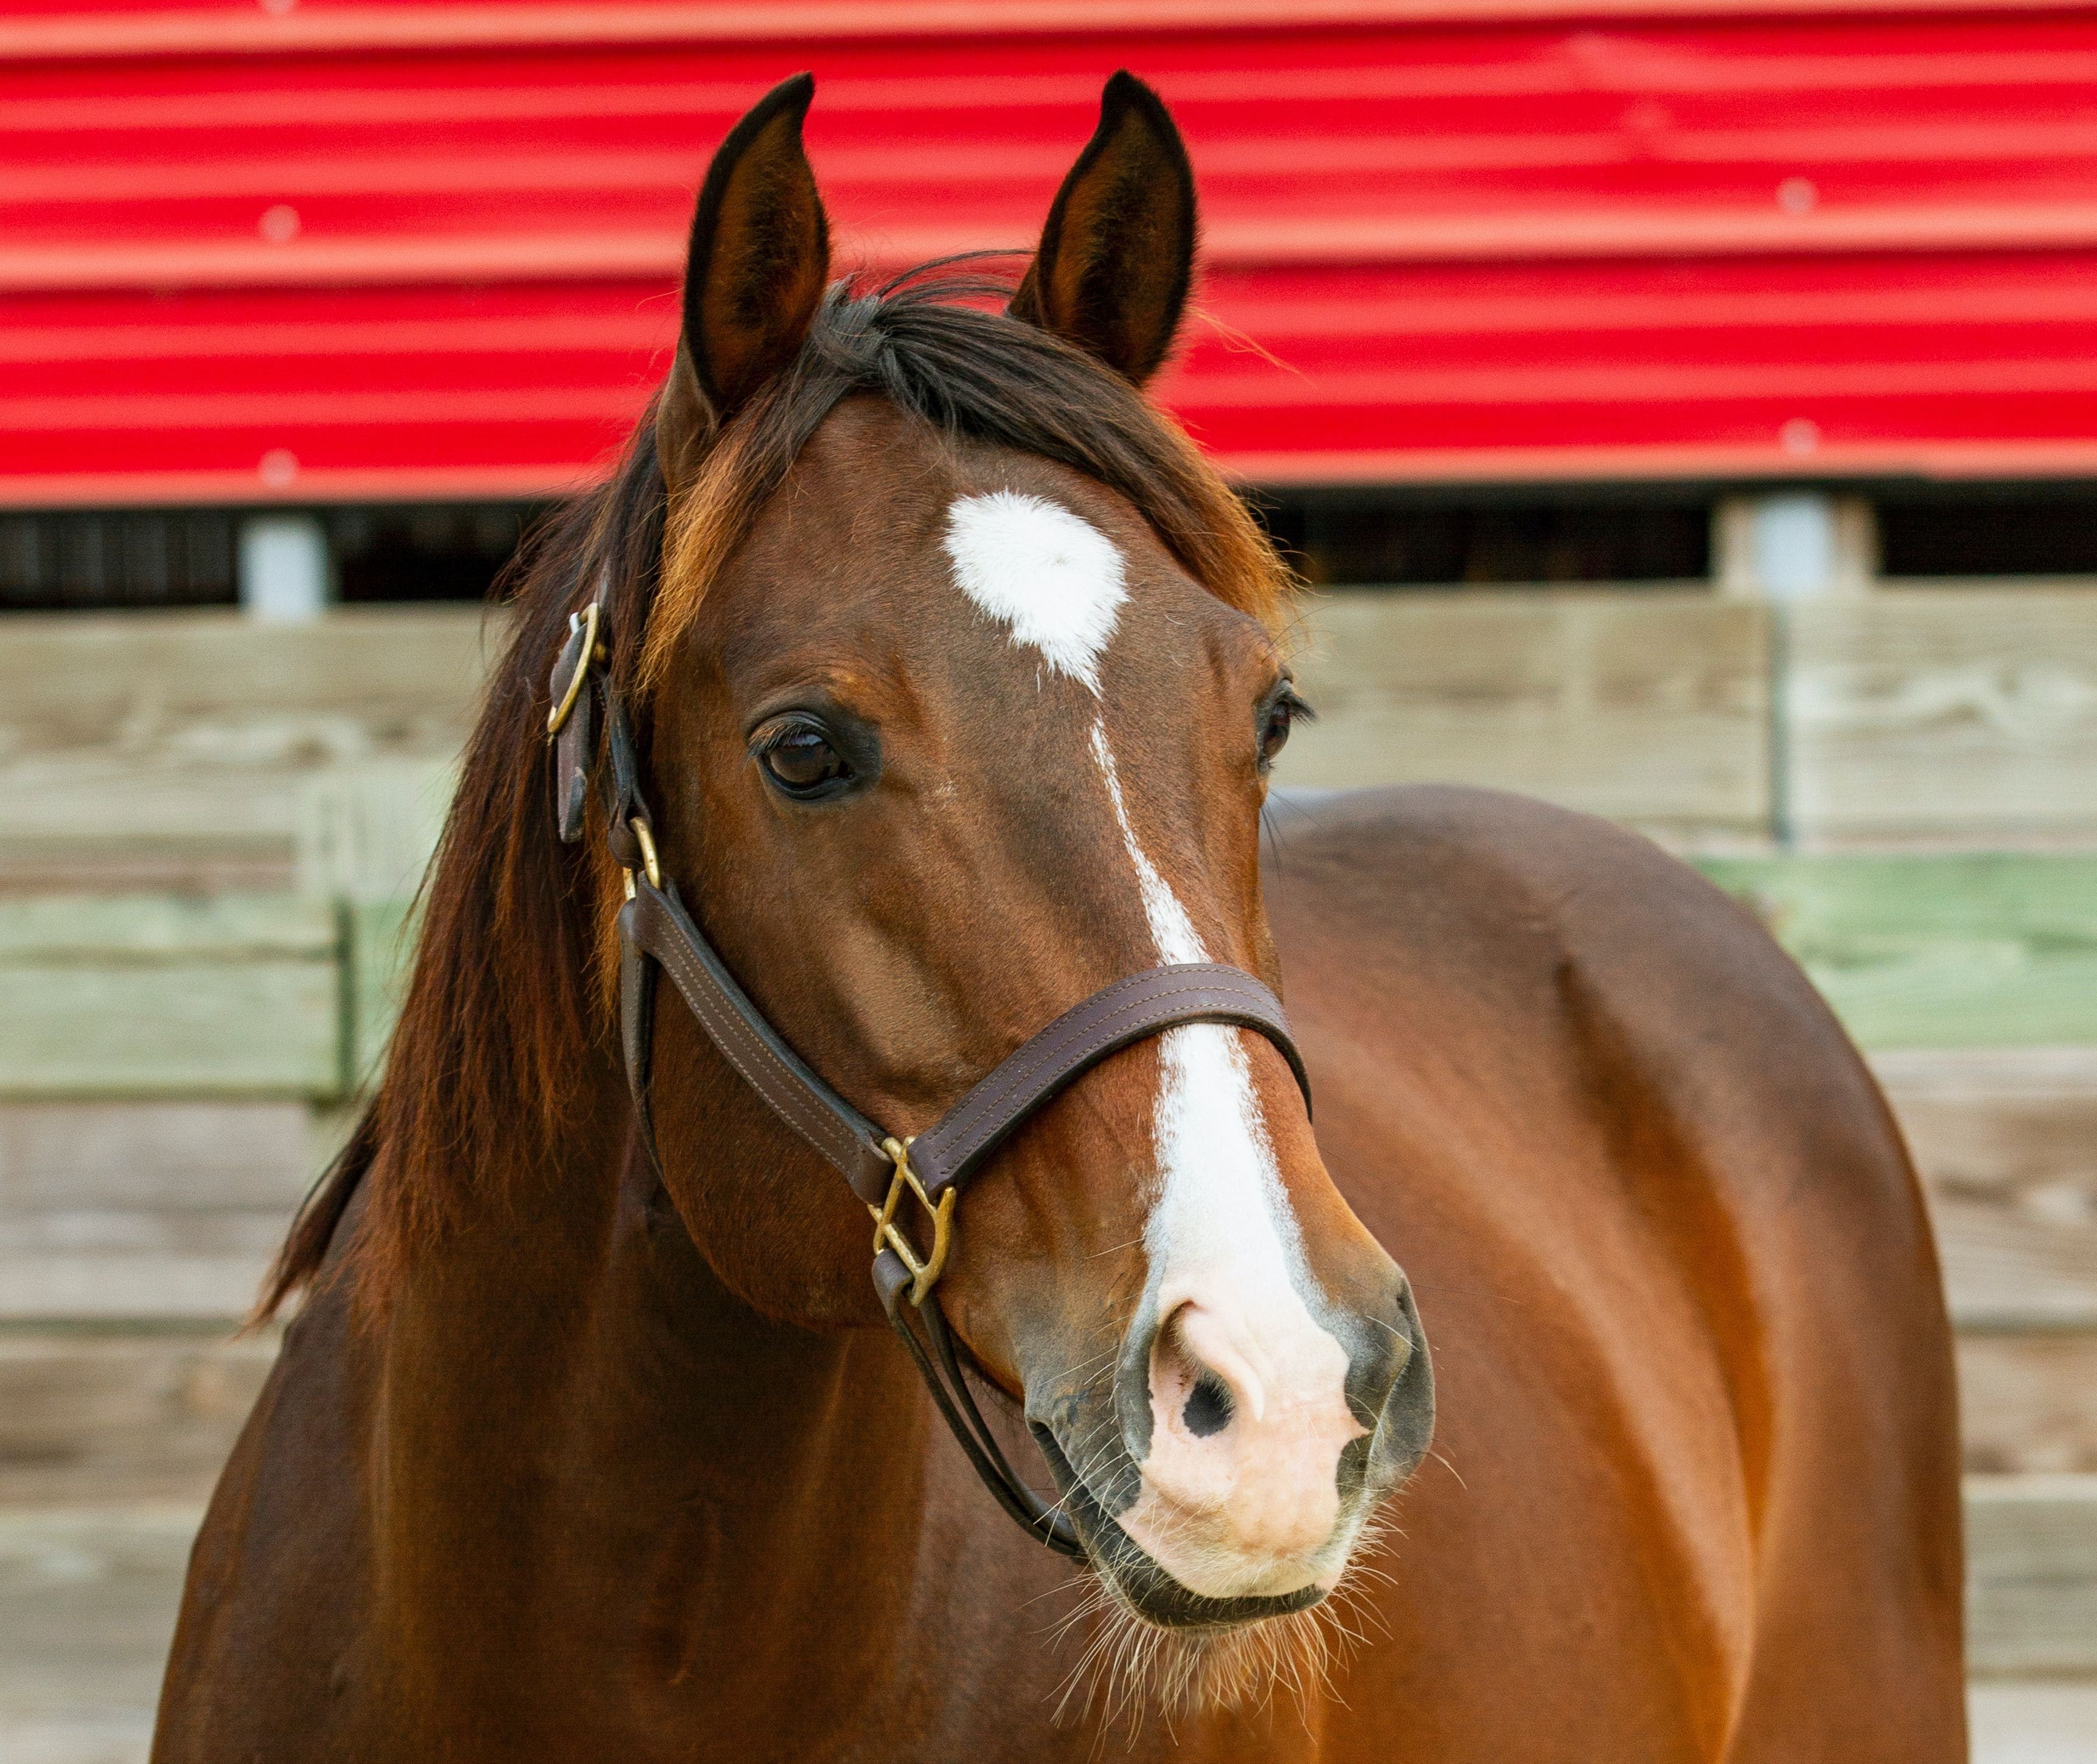 Kali is a lesson horse at J & S Performance Horses. She is a bay mare with a connected star and snip, wearing a leather halter.